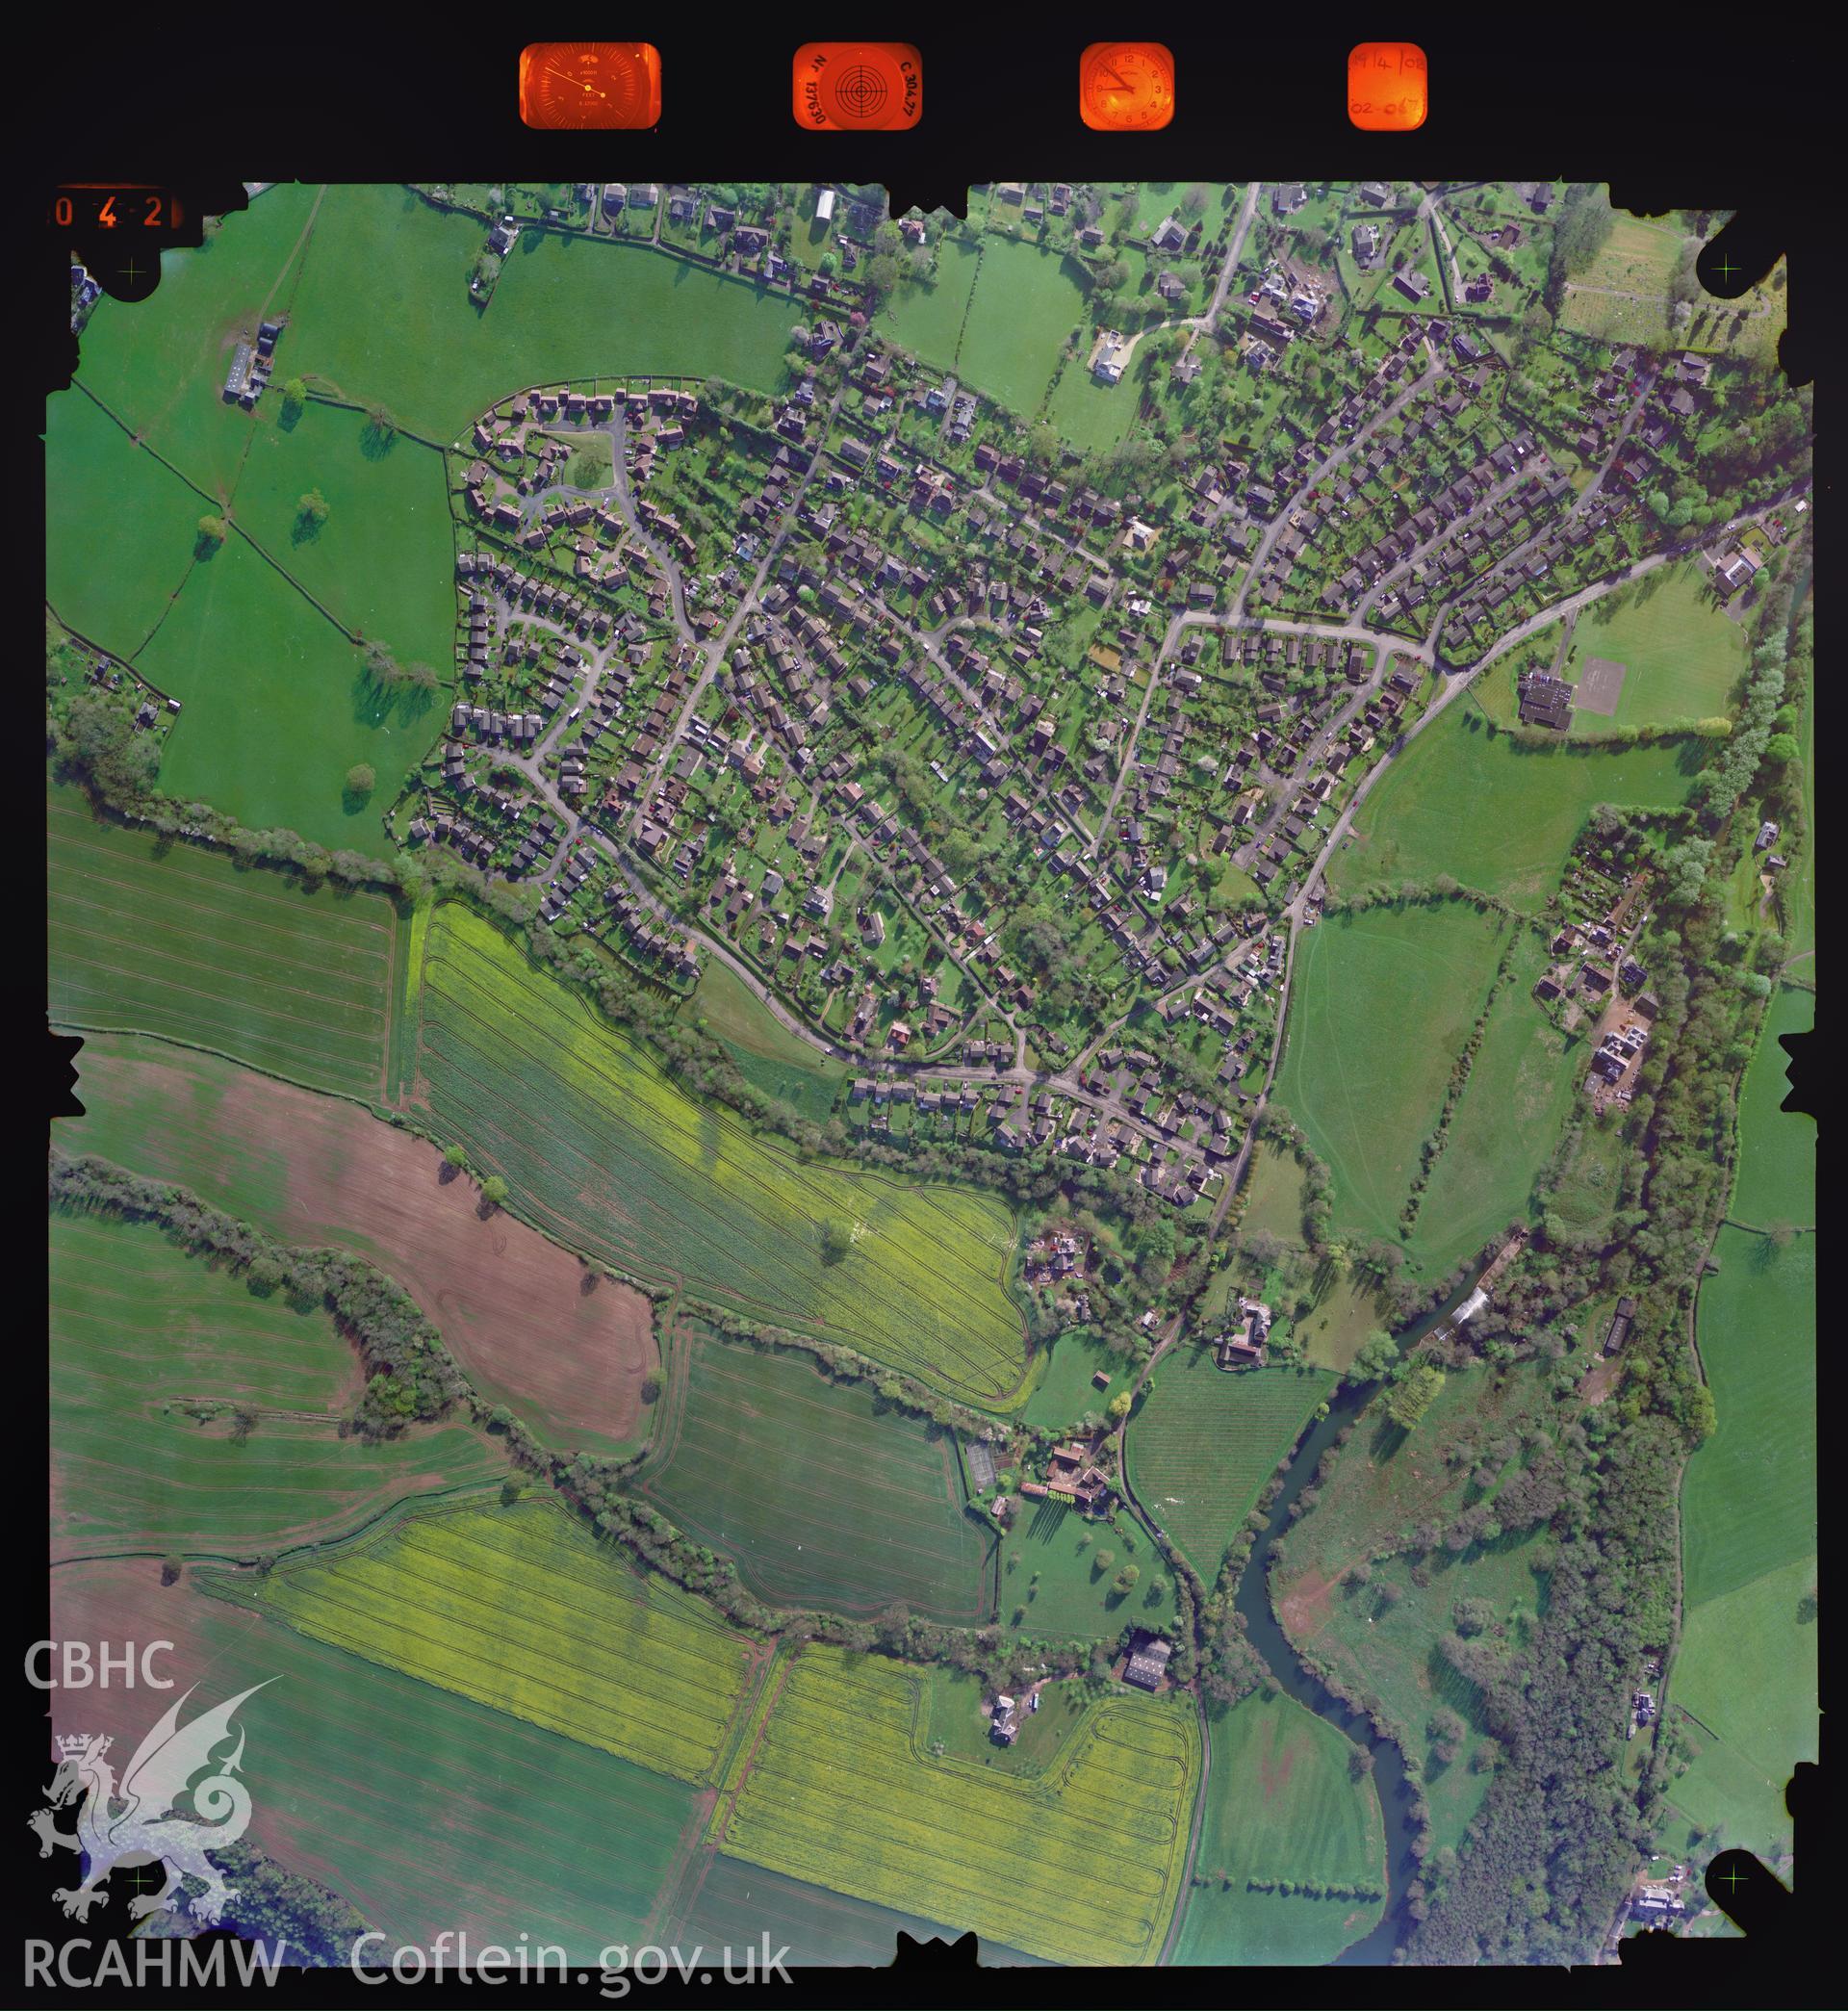 Digitized copy of a colour aerial photograph showing the Osbaston area, taken by Ordnance Survey, 2002.